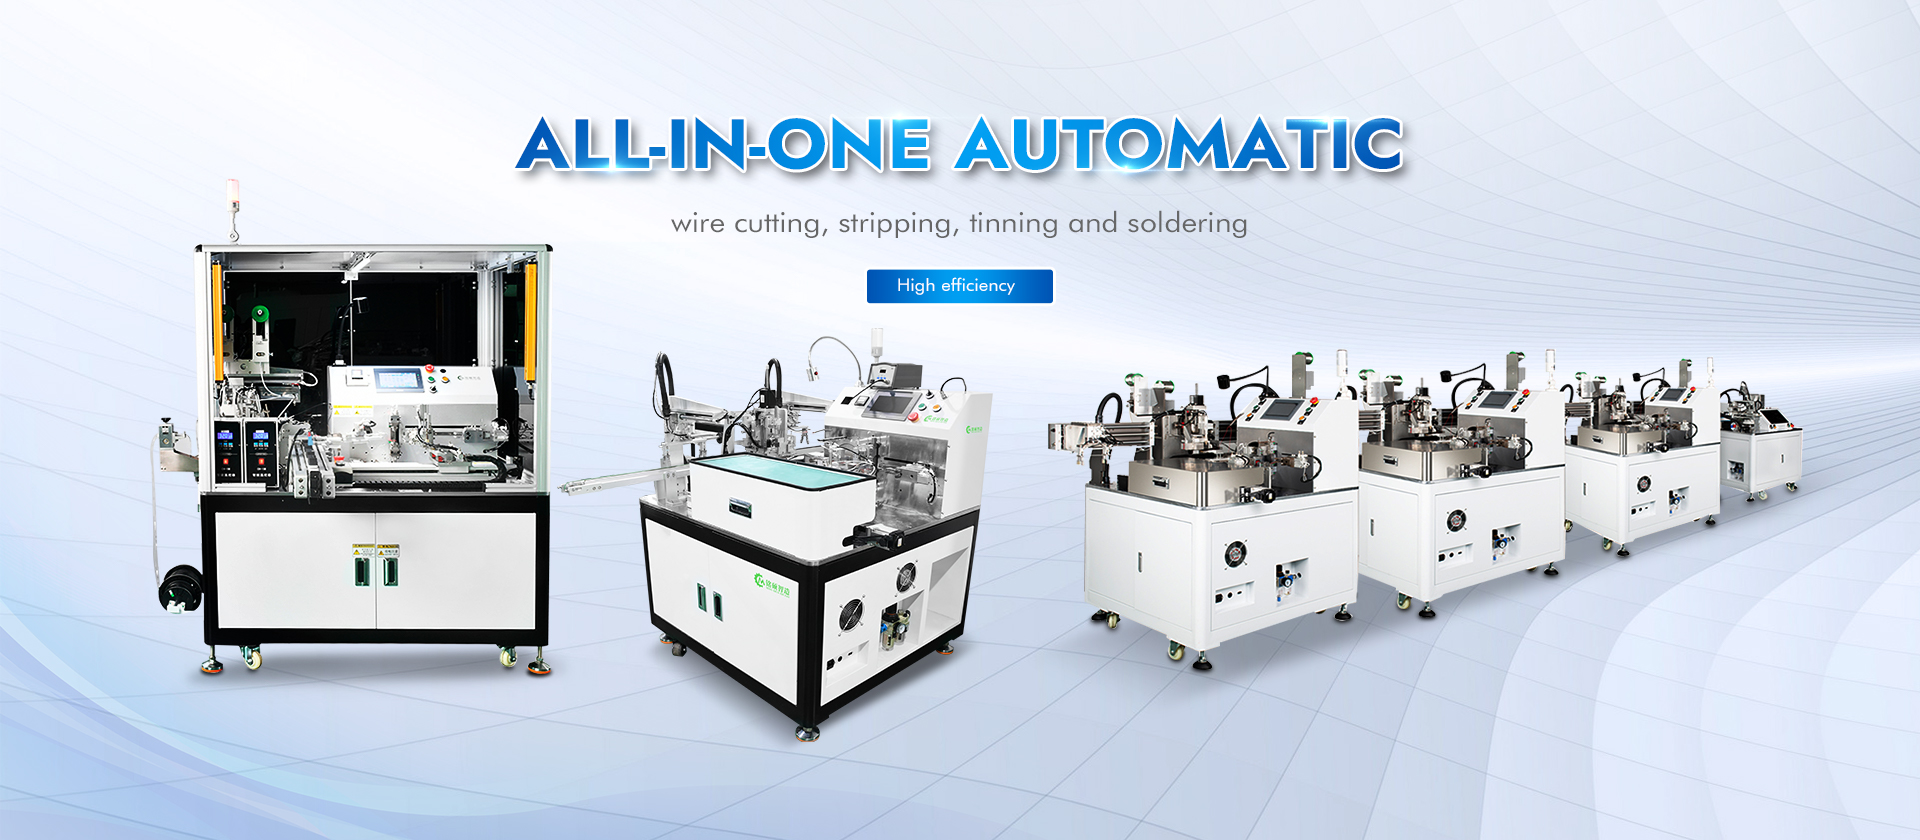 Allinne Automatic Wire Cutting, Stripping, Tinning at Soldering